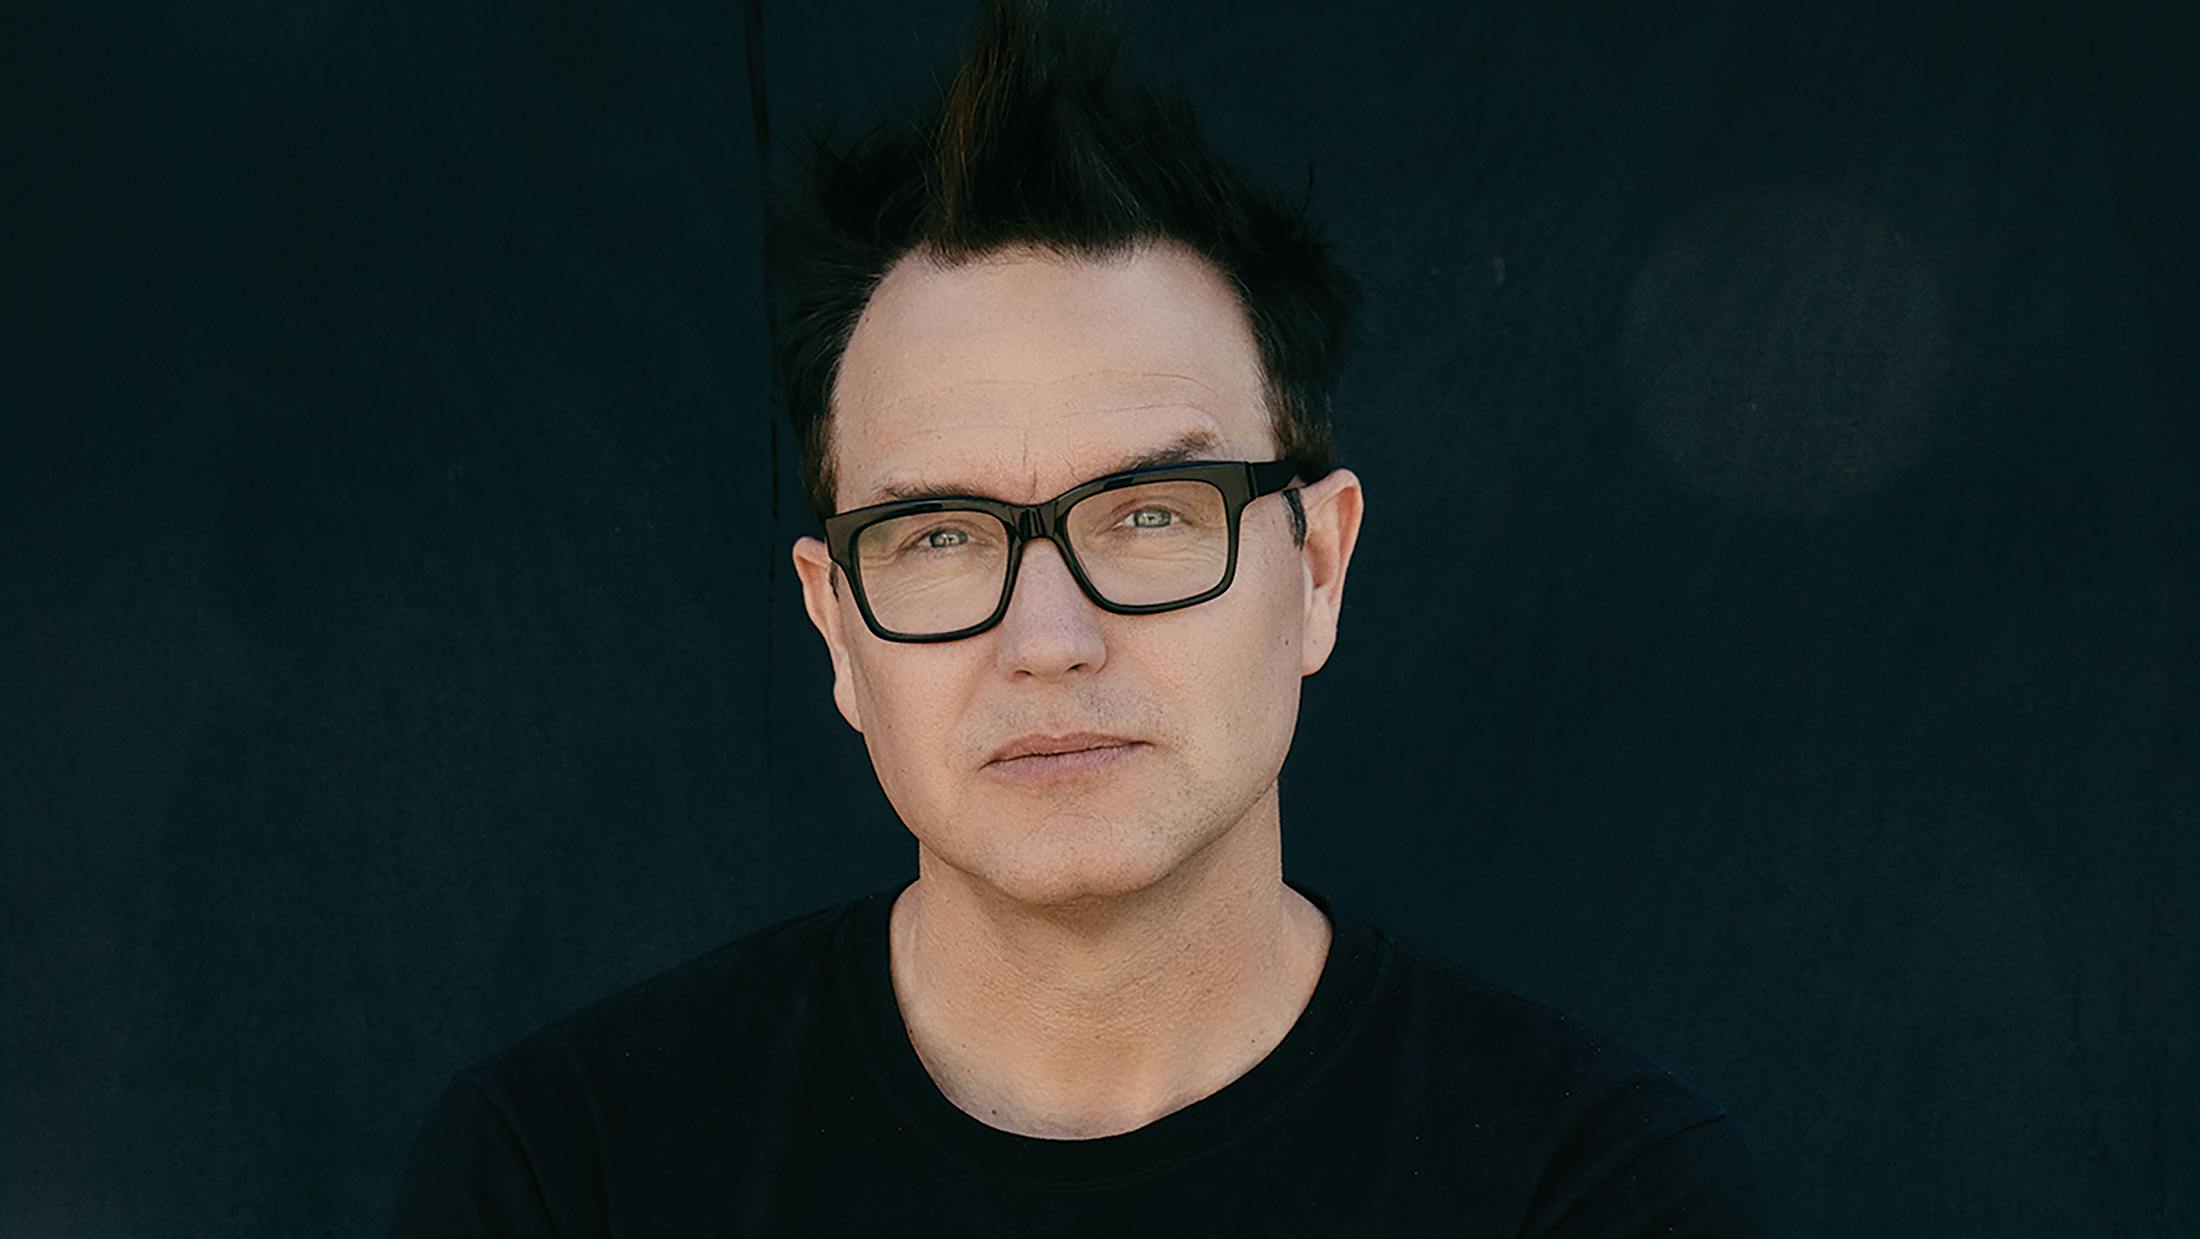 Mark Hoppus' text to his doctor is a reminder to get lumps checked